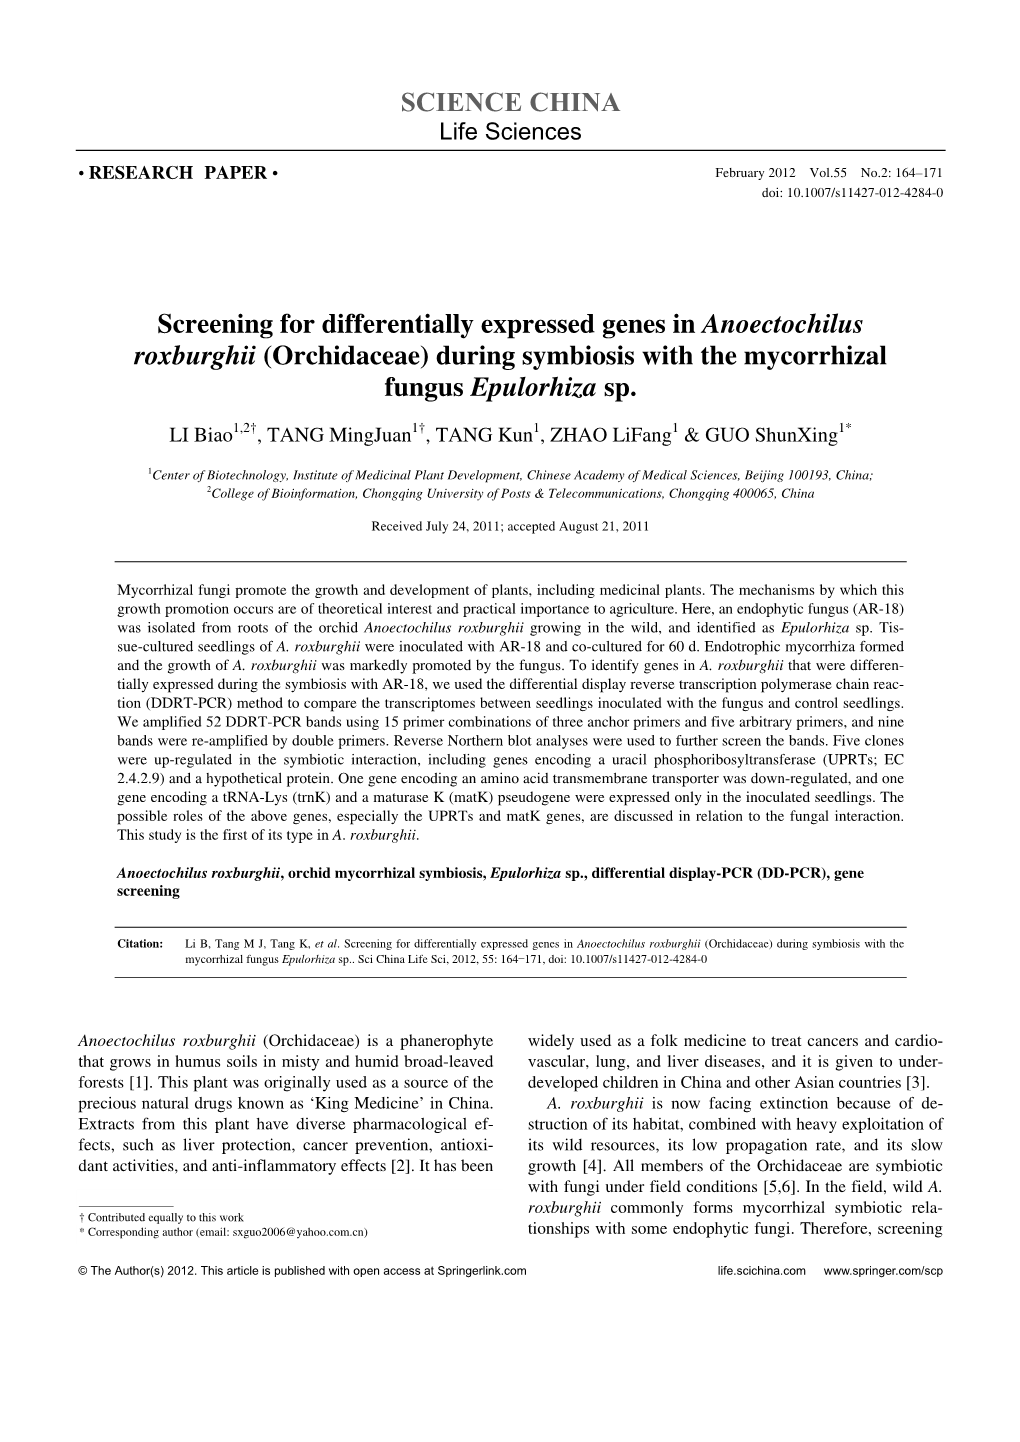 Screening for Differentially Expressed Genes in Anoectochilus Roxburghii (Orchidaceae) During Symbiosis with the Mycorrhizal Fungus Epulorhiza Sp